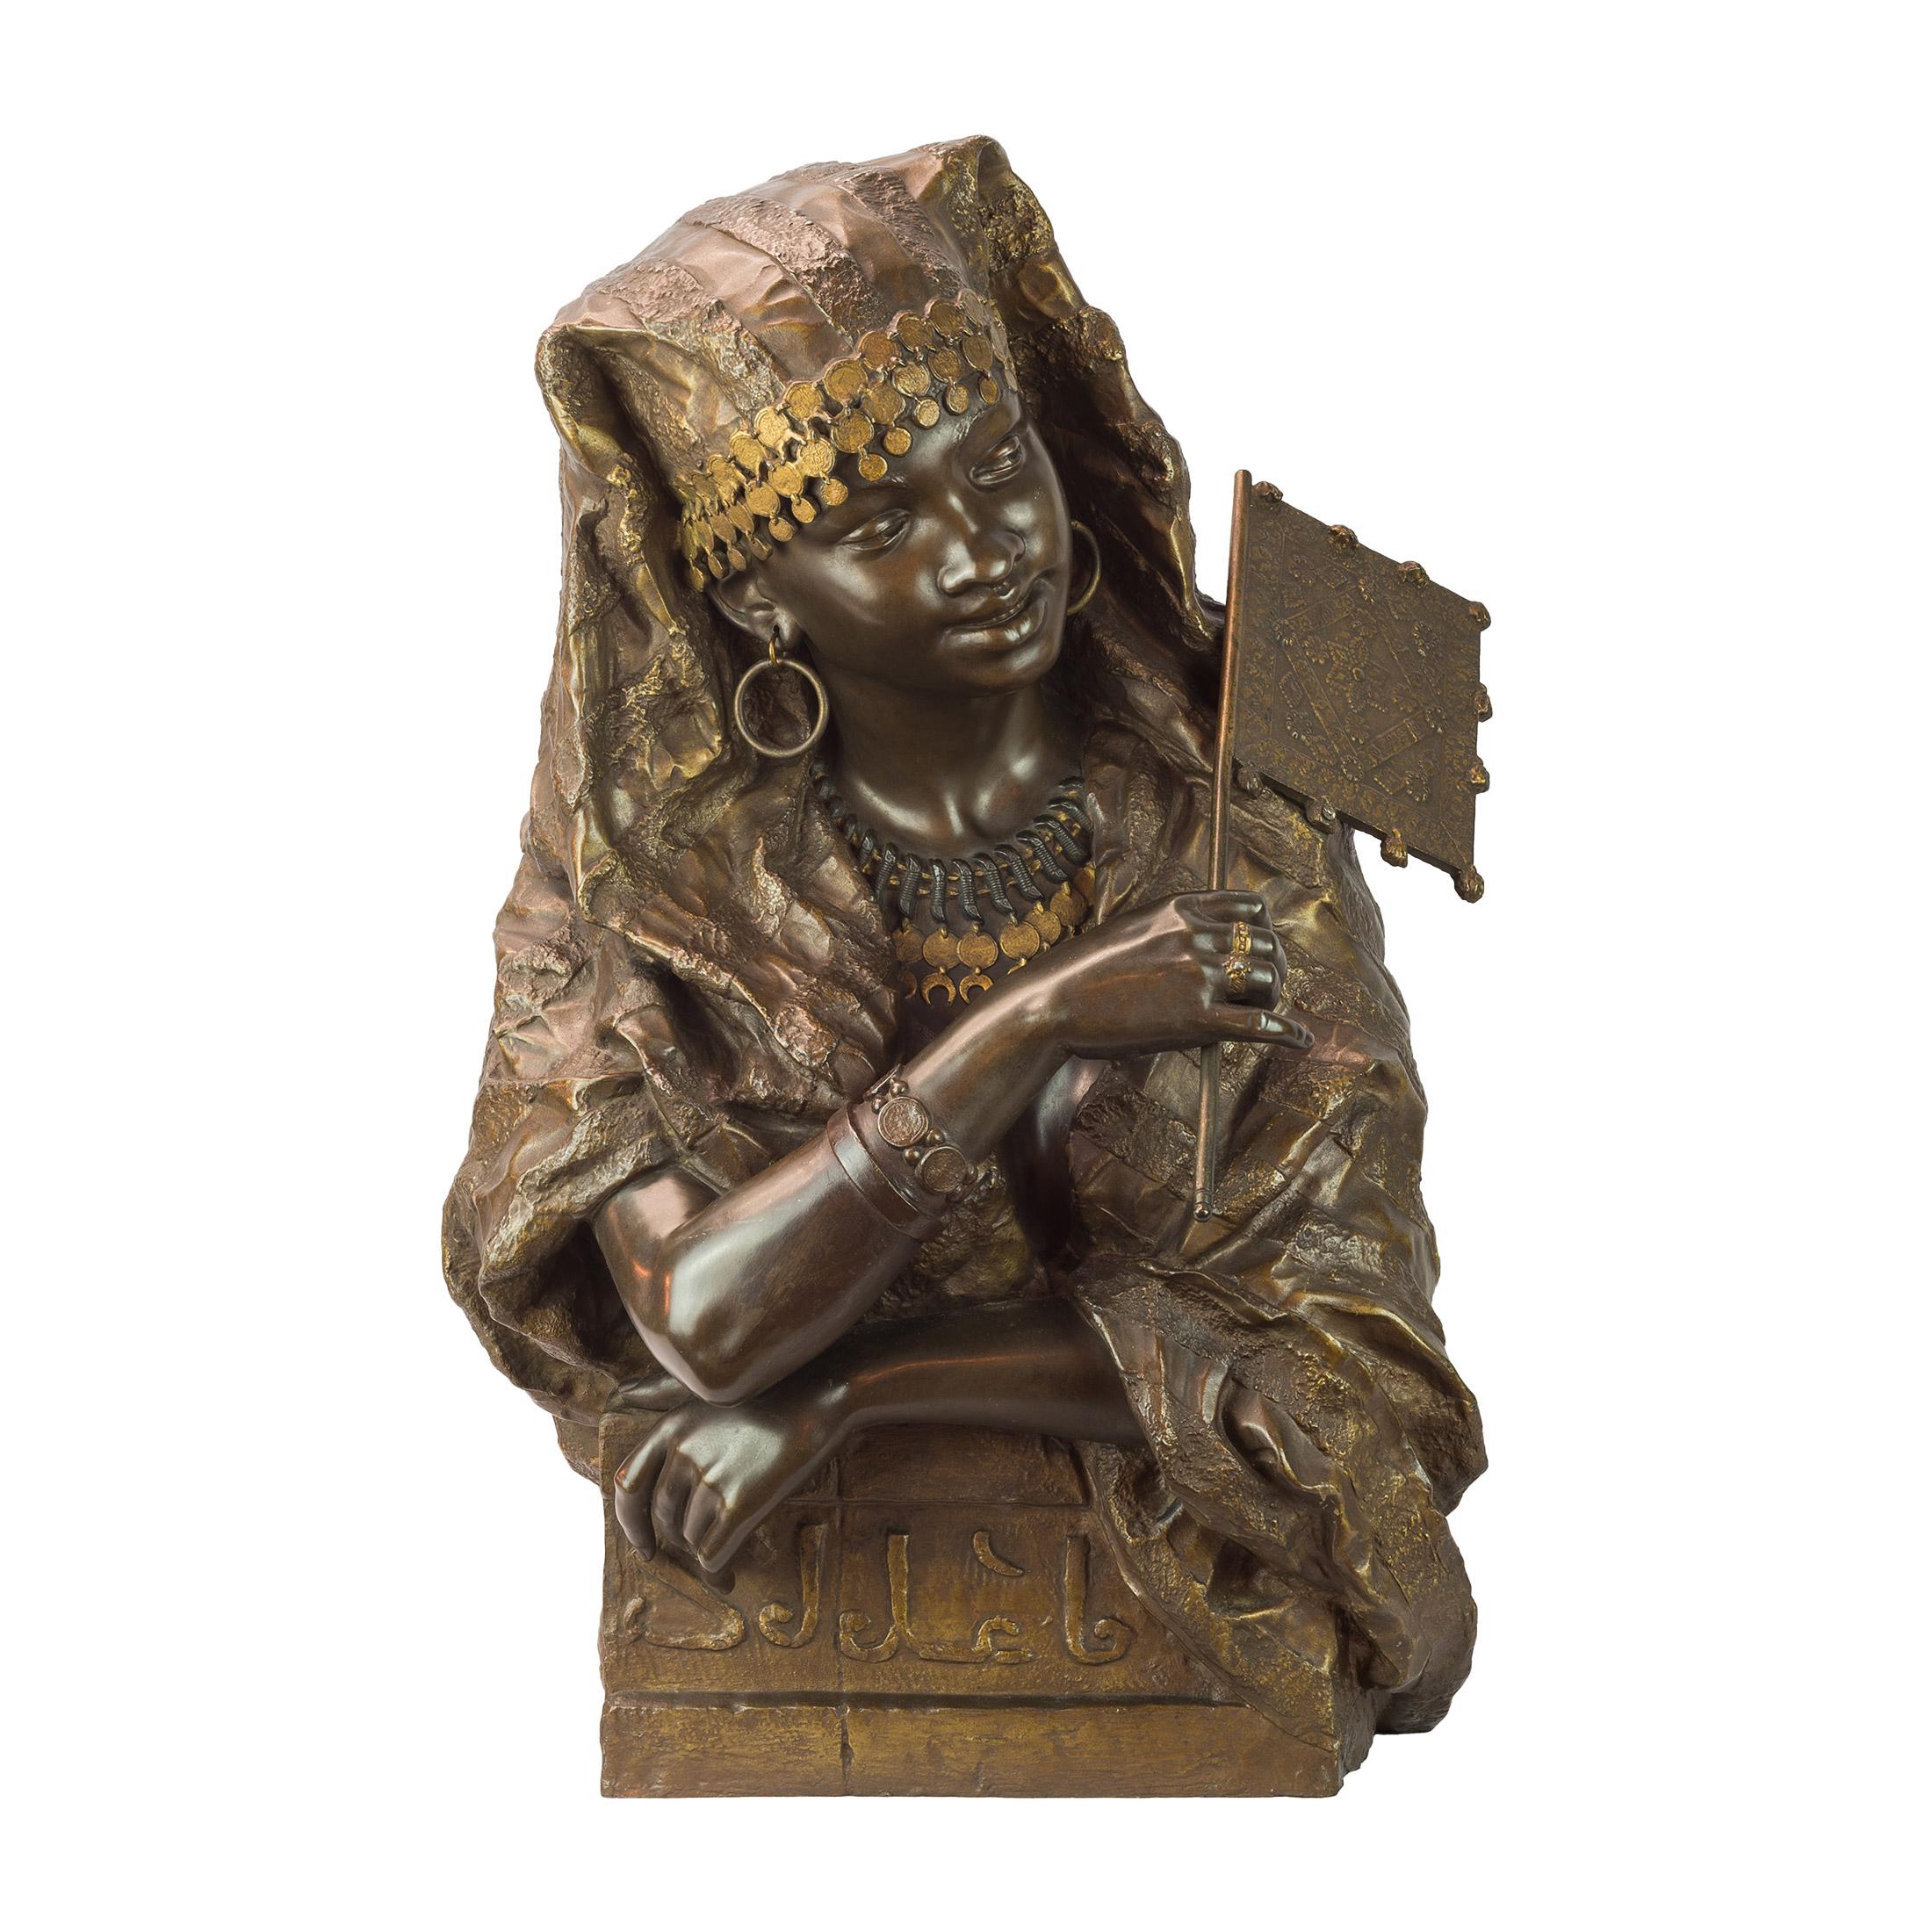 Gaston Leroux Figurative Sculpture - Polychrome and gilt bronze bust of a gypsy woman